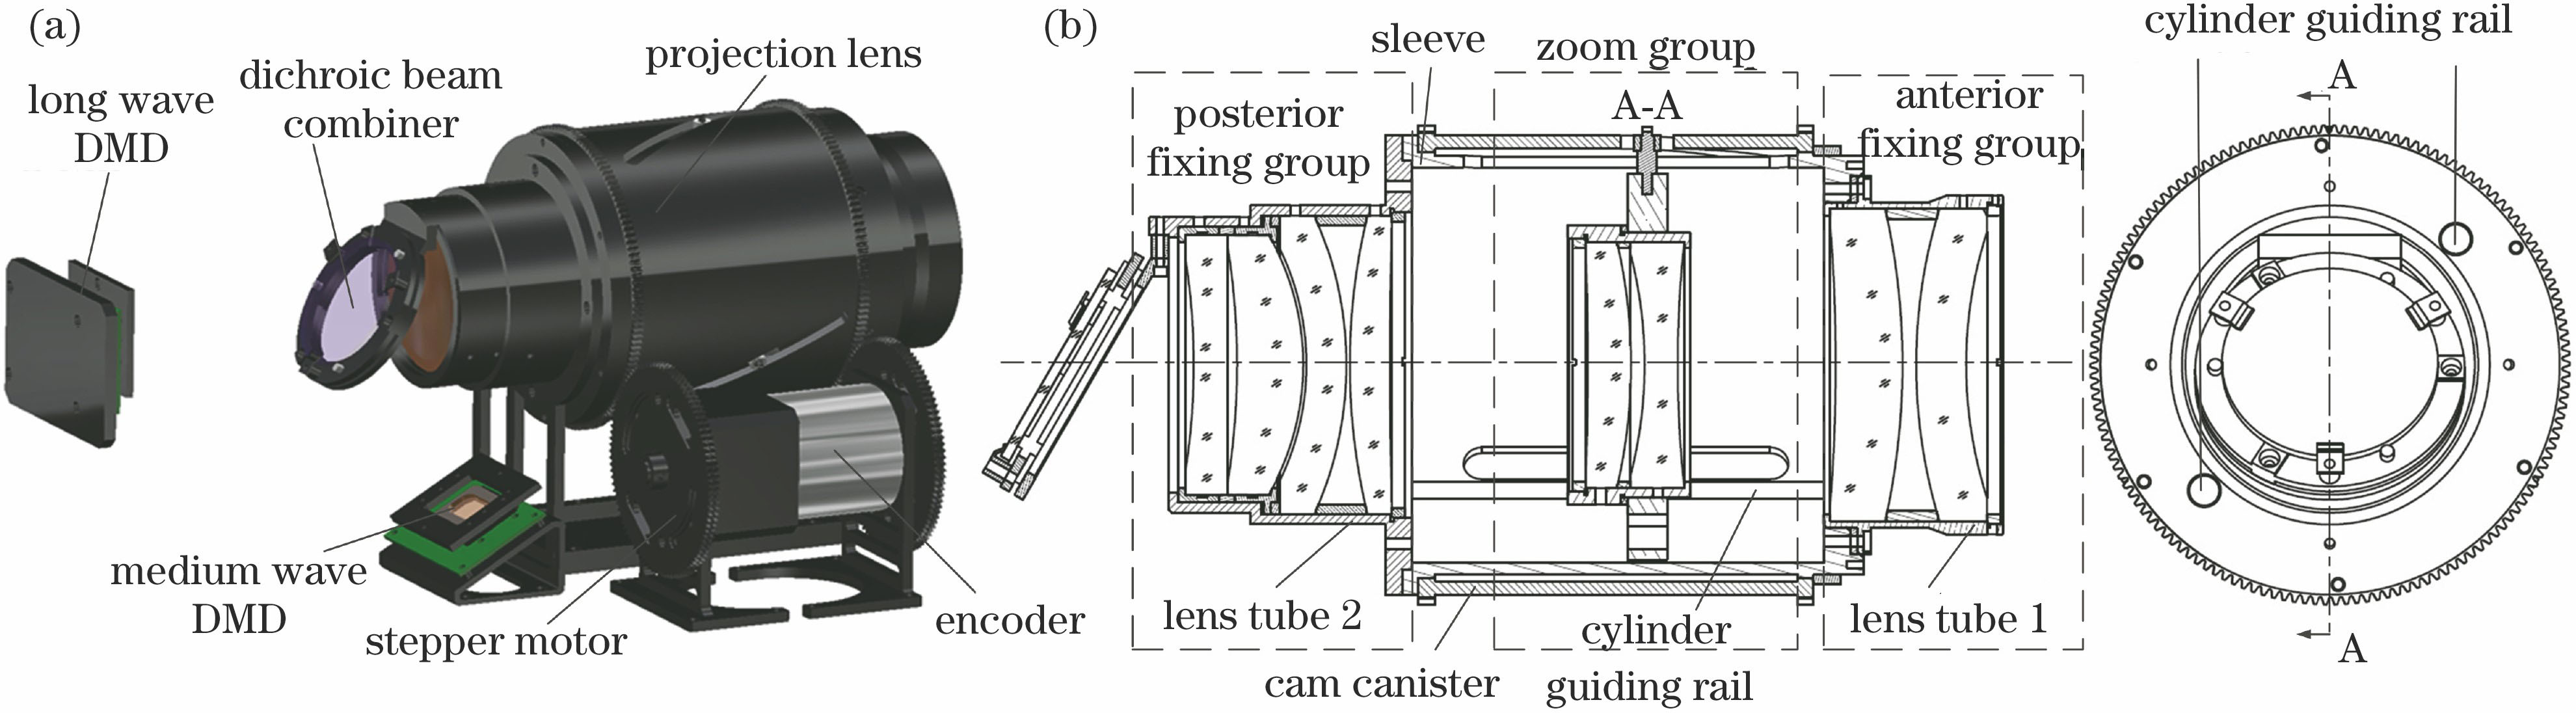 Opto-mechanical structure of zoom projection lens. (a) General structure; (b) lens structure